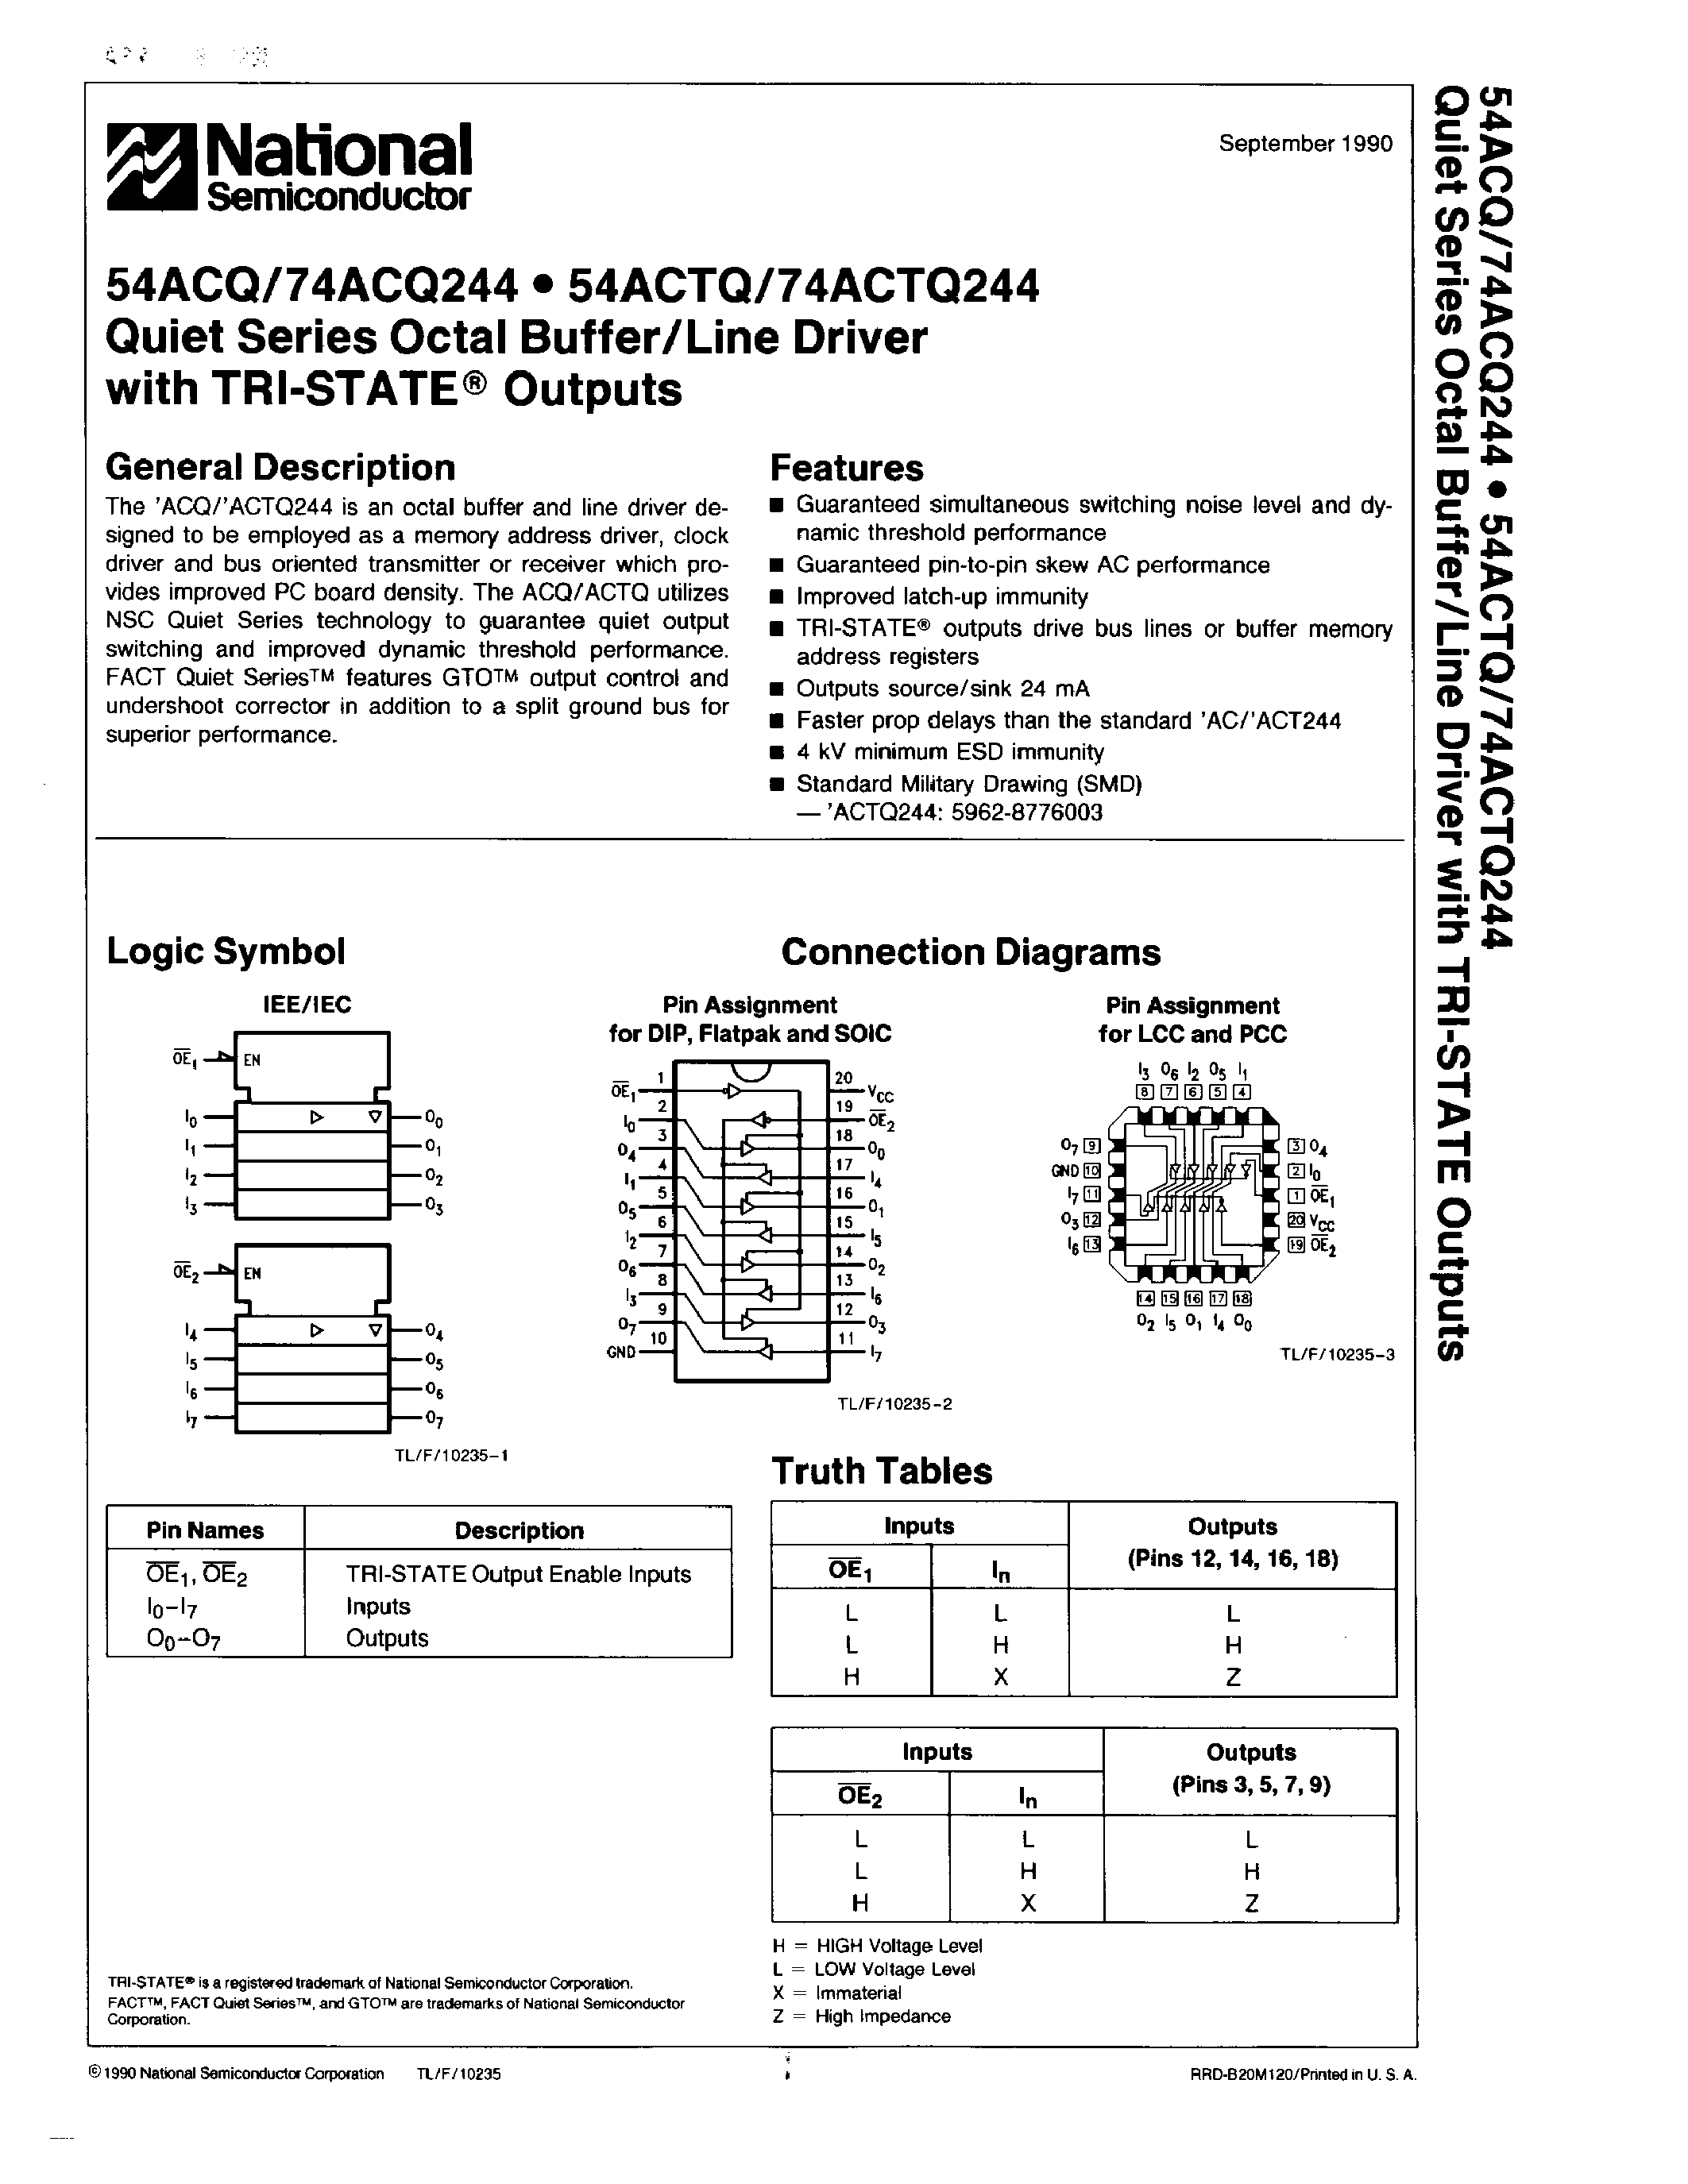 Datasheet 74ACQ244L - Quiet Seres Octal Buffer/Line Driver with TRI-STATE Outputs page 1